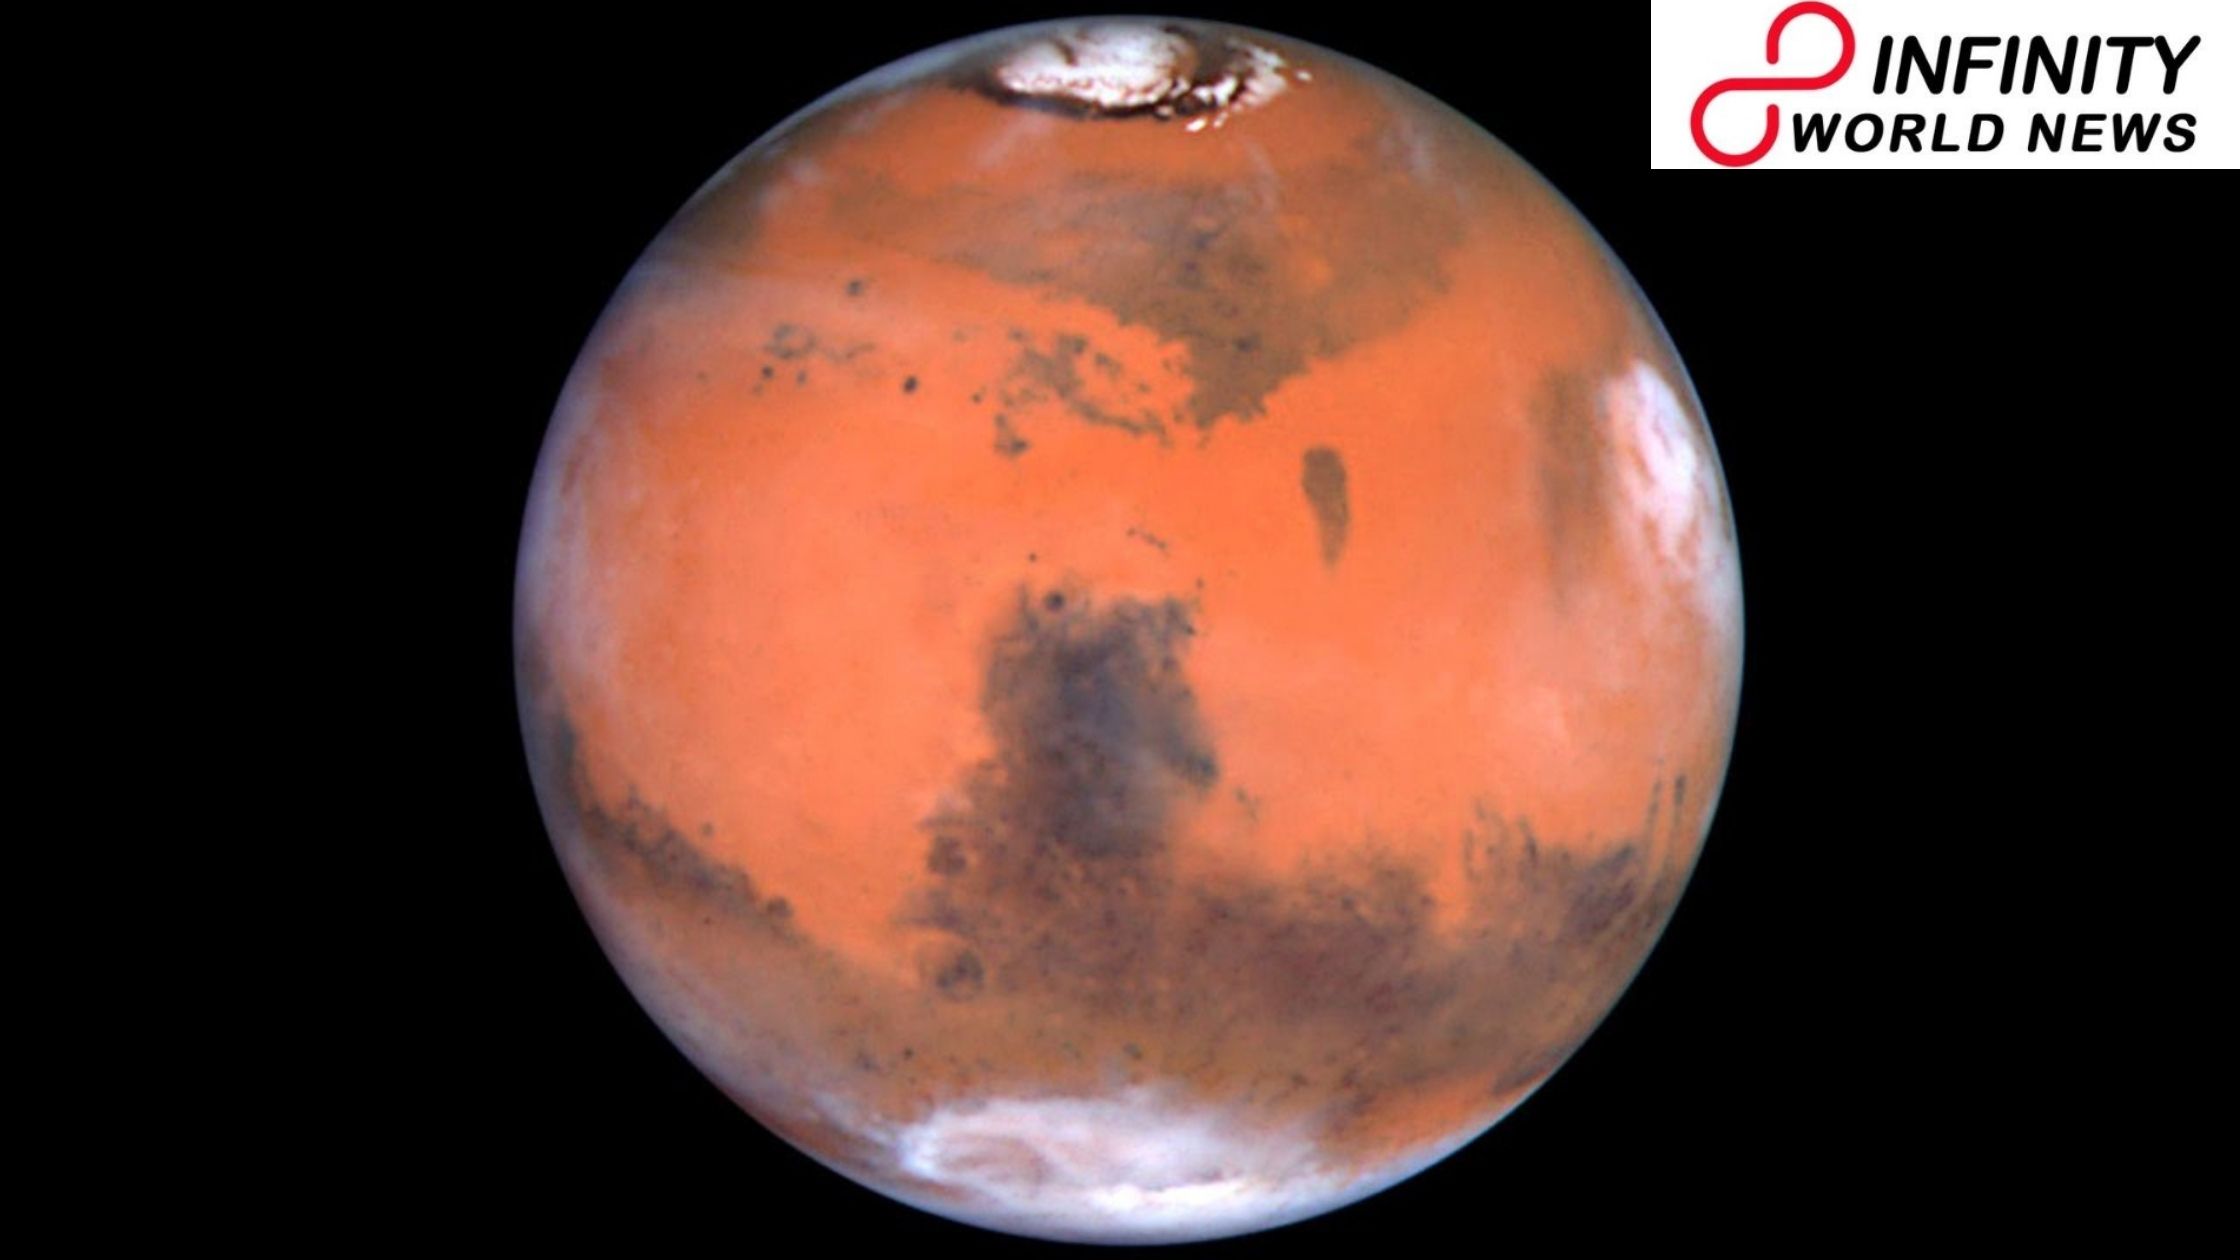 Microbes of Earth Could Sustain on Martian Surface, Shows Study